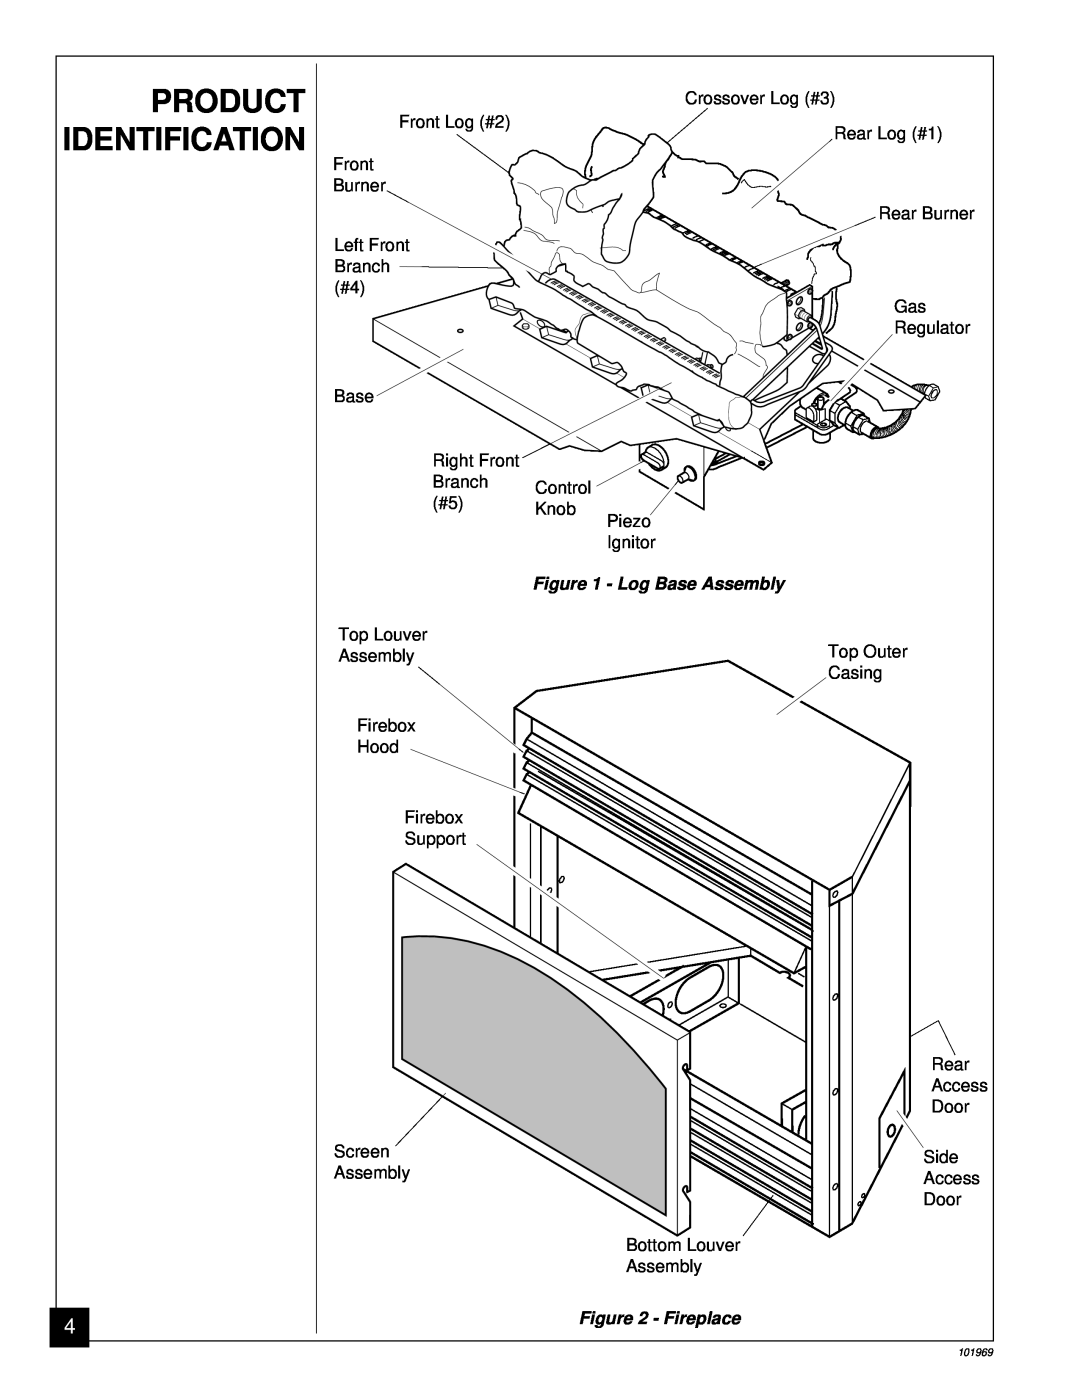 Desa UNVENTED (VENT-FREE) PROPANE GAS FIREPLACE installation manual Product, Identification, Log Base Assembly, Fireplace 